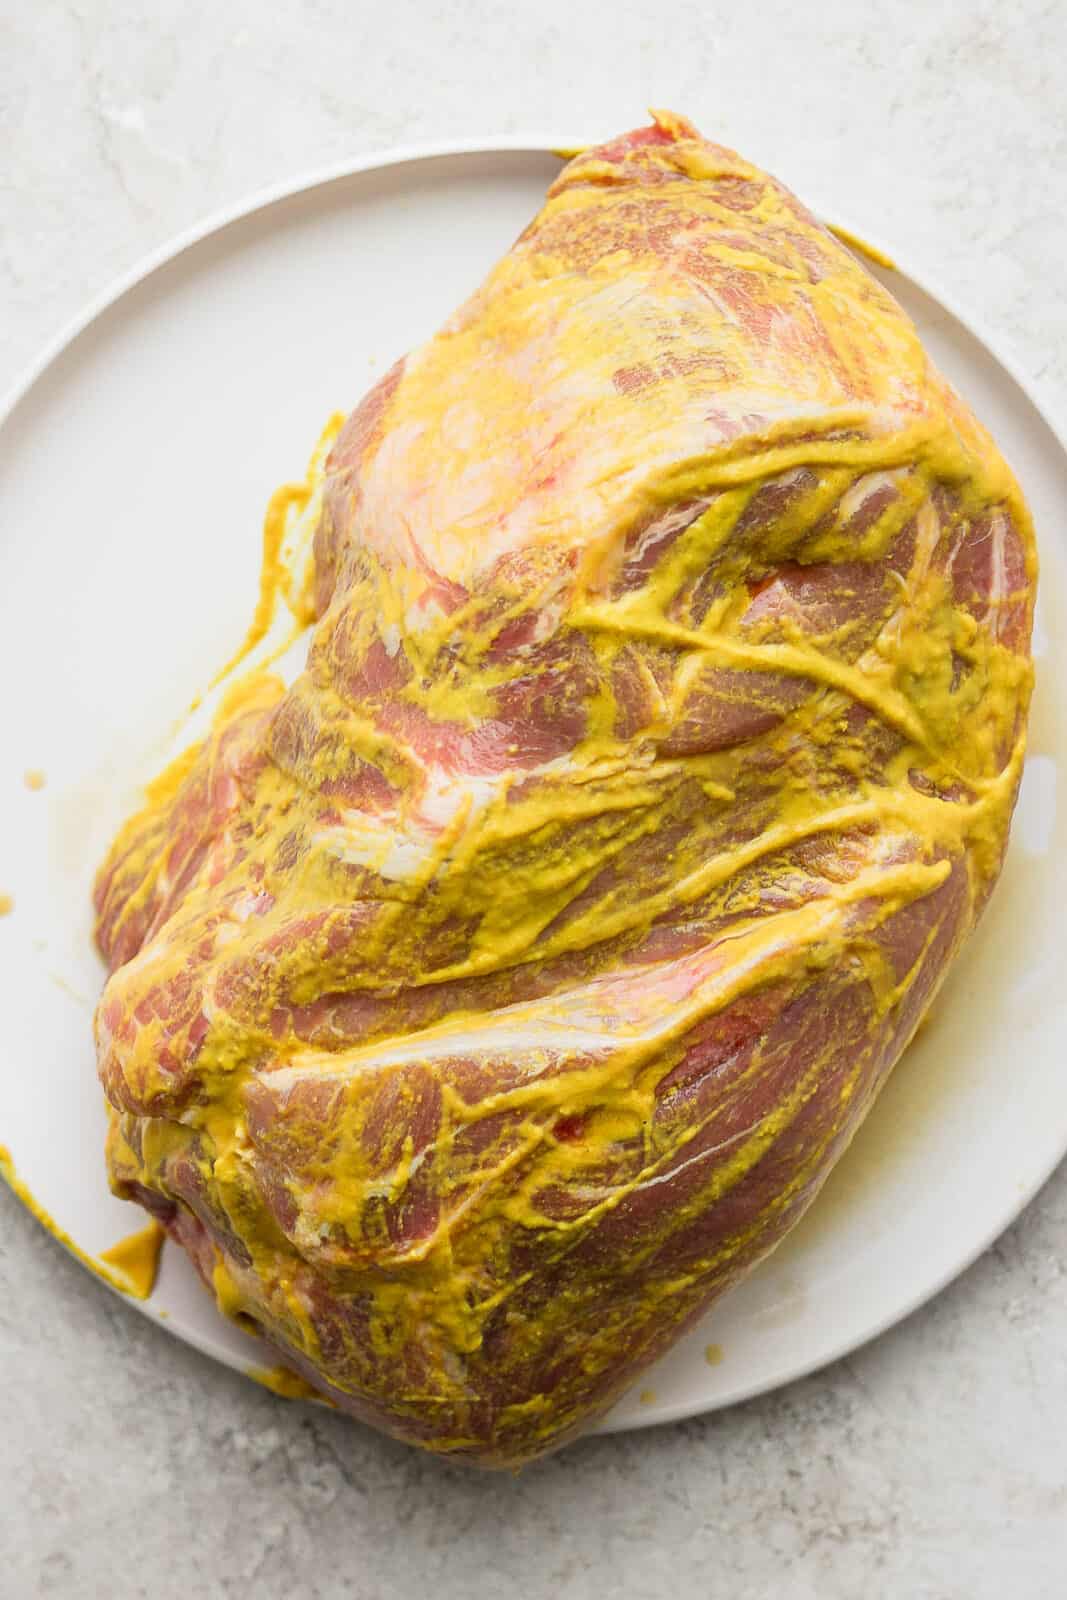 A pork shoulder with yellow mustard rubbed all over the outside.